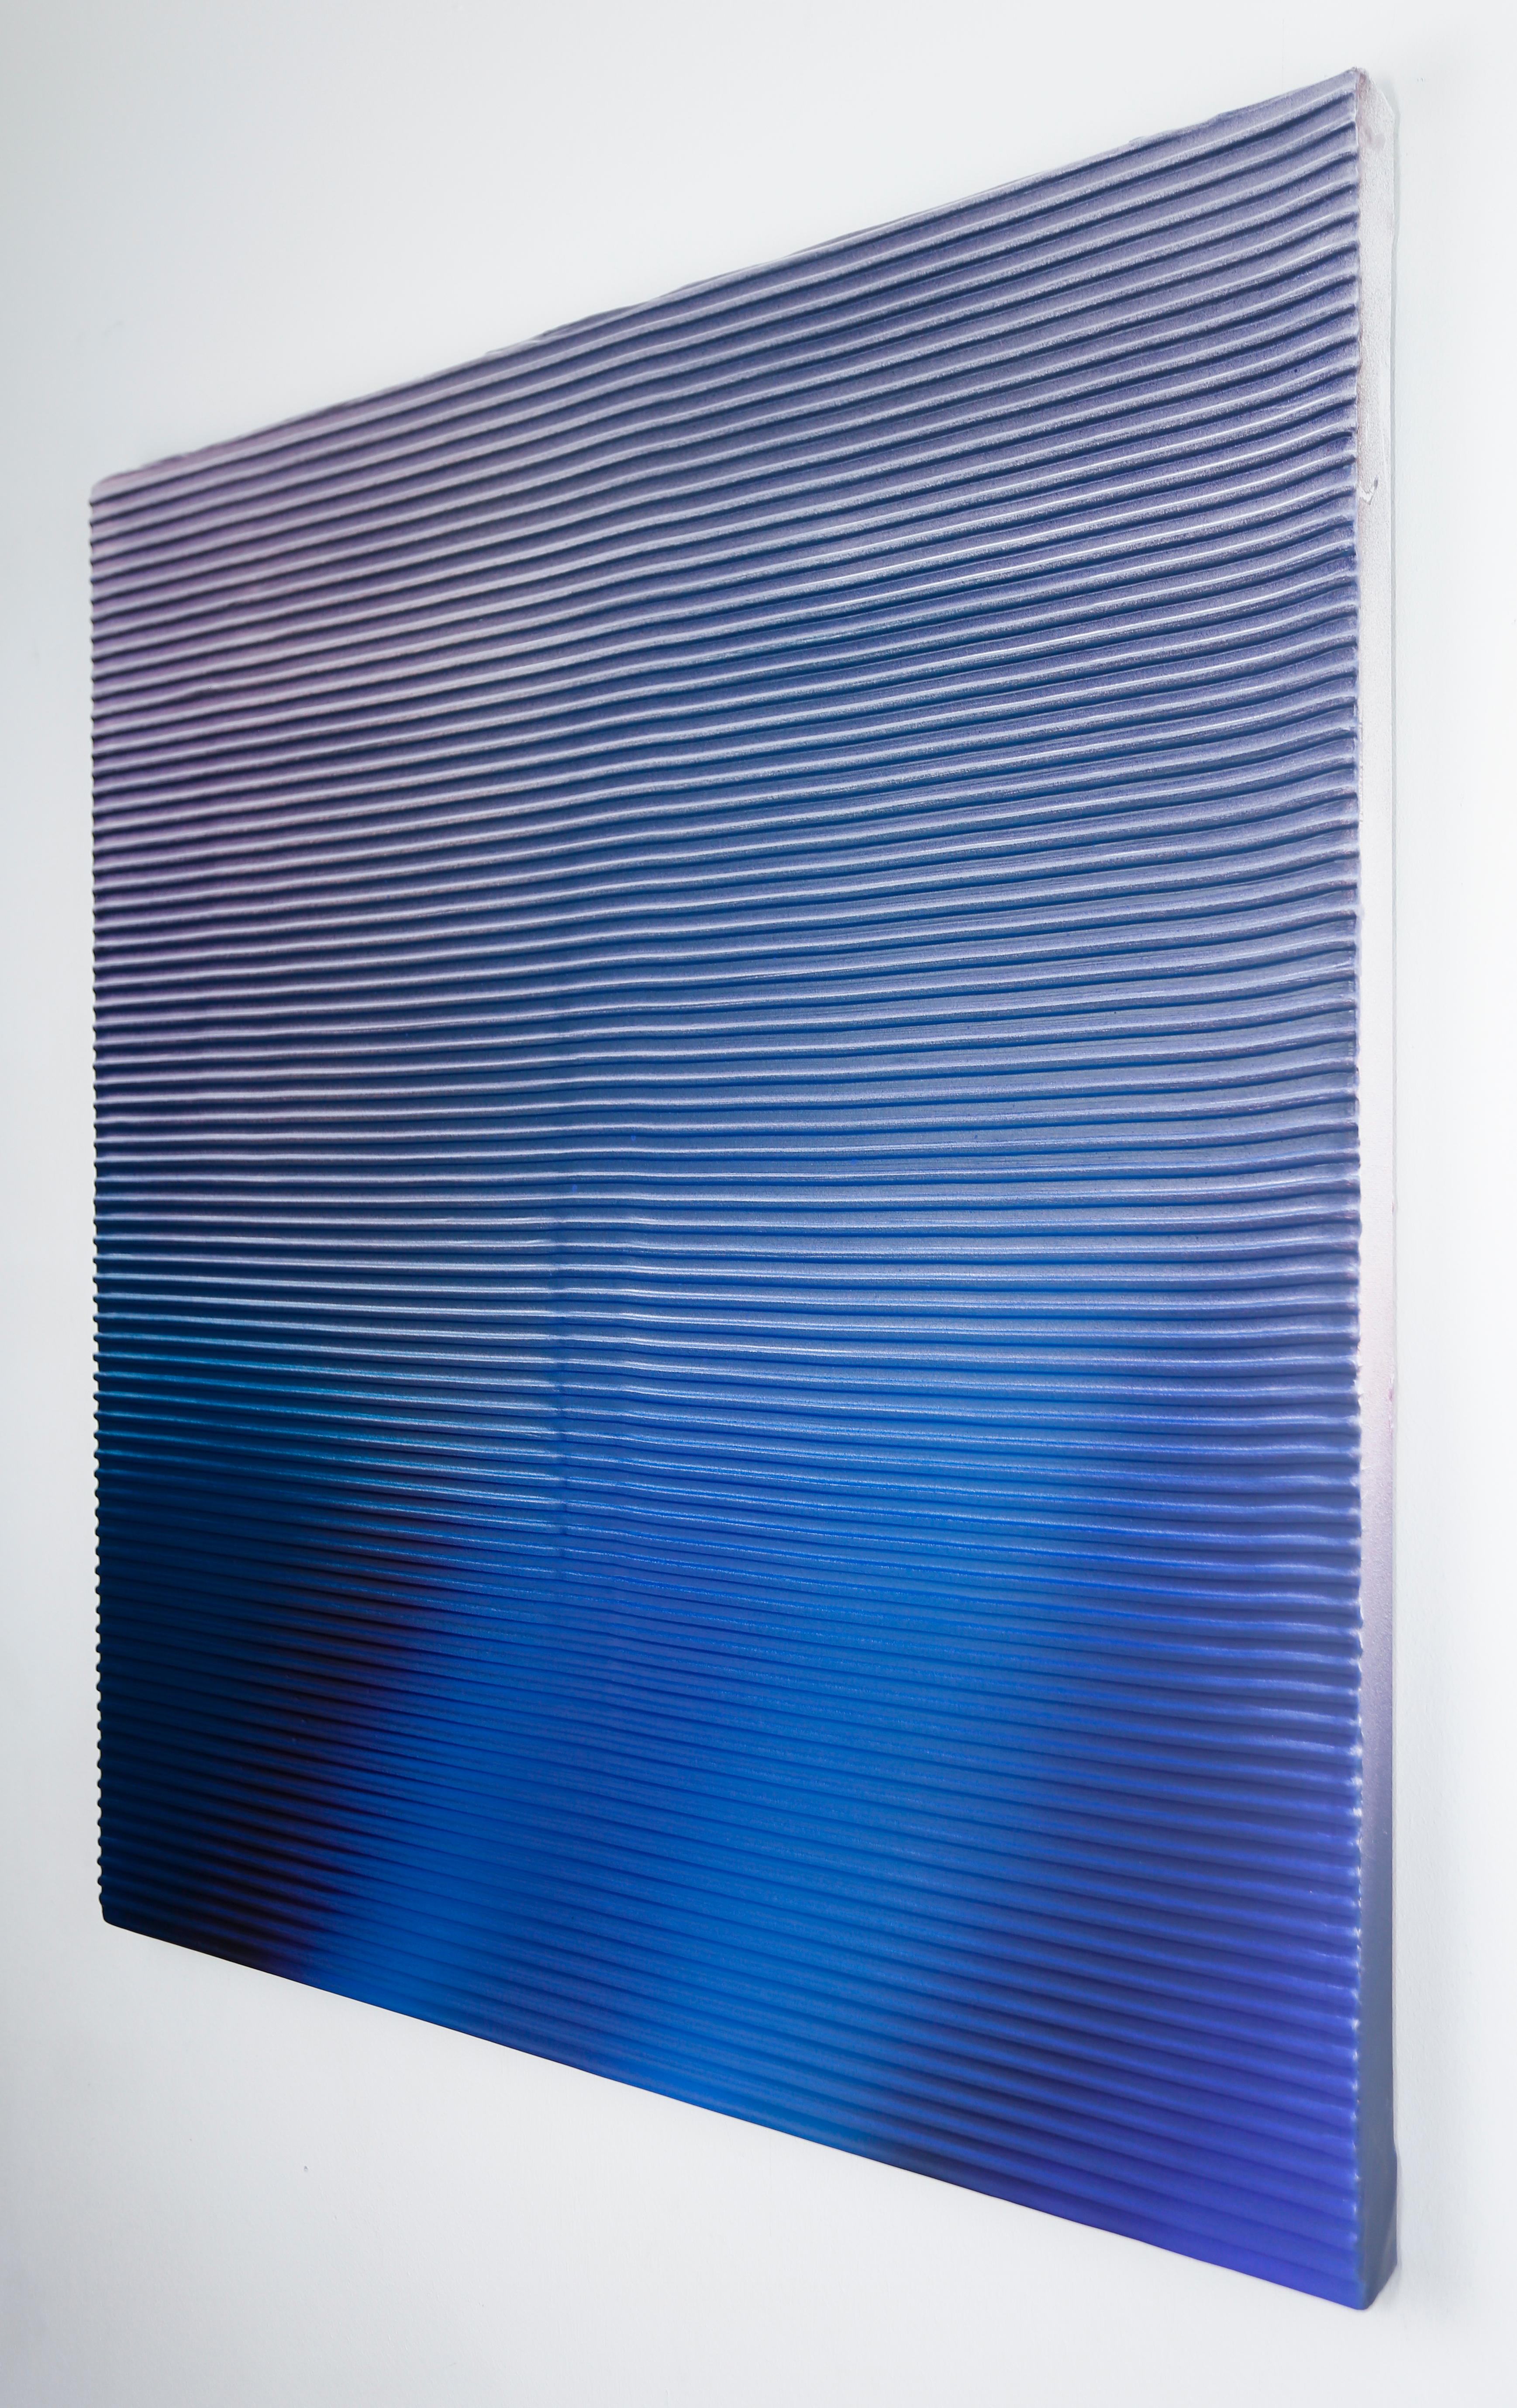 Display No 34 - Striped, geometric, white and blue, minimal, abstract painting  2